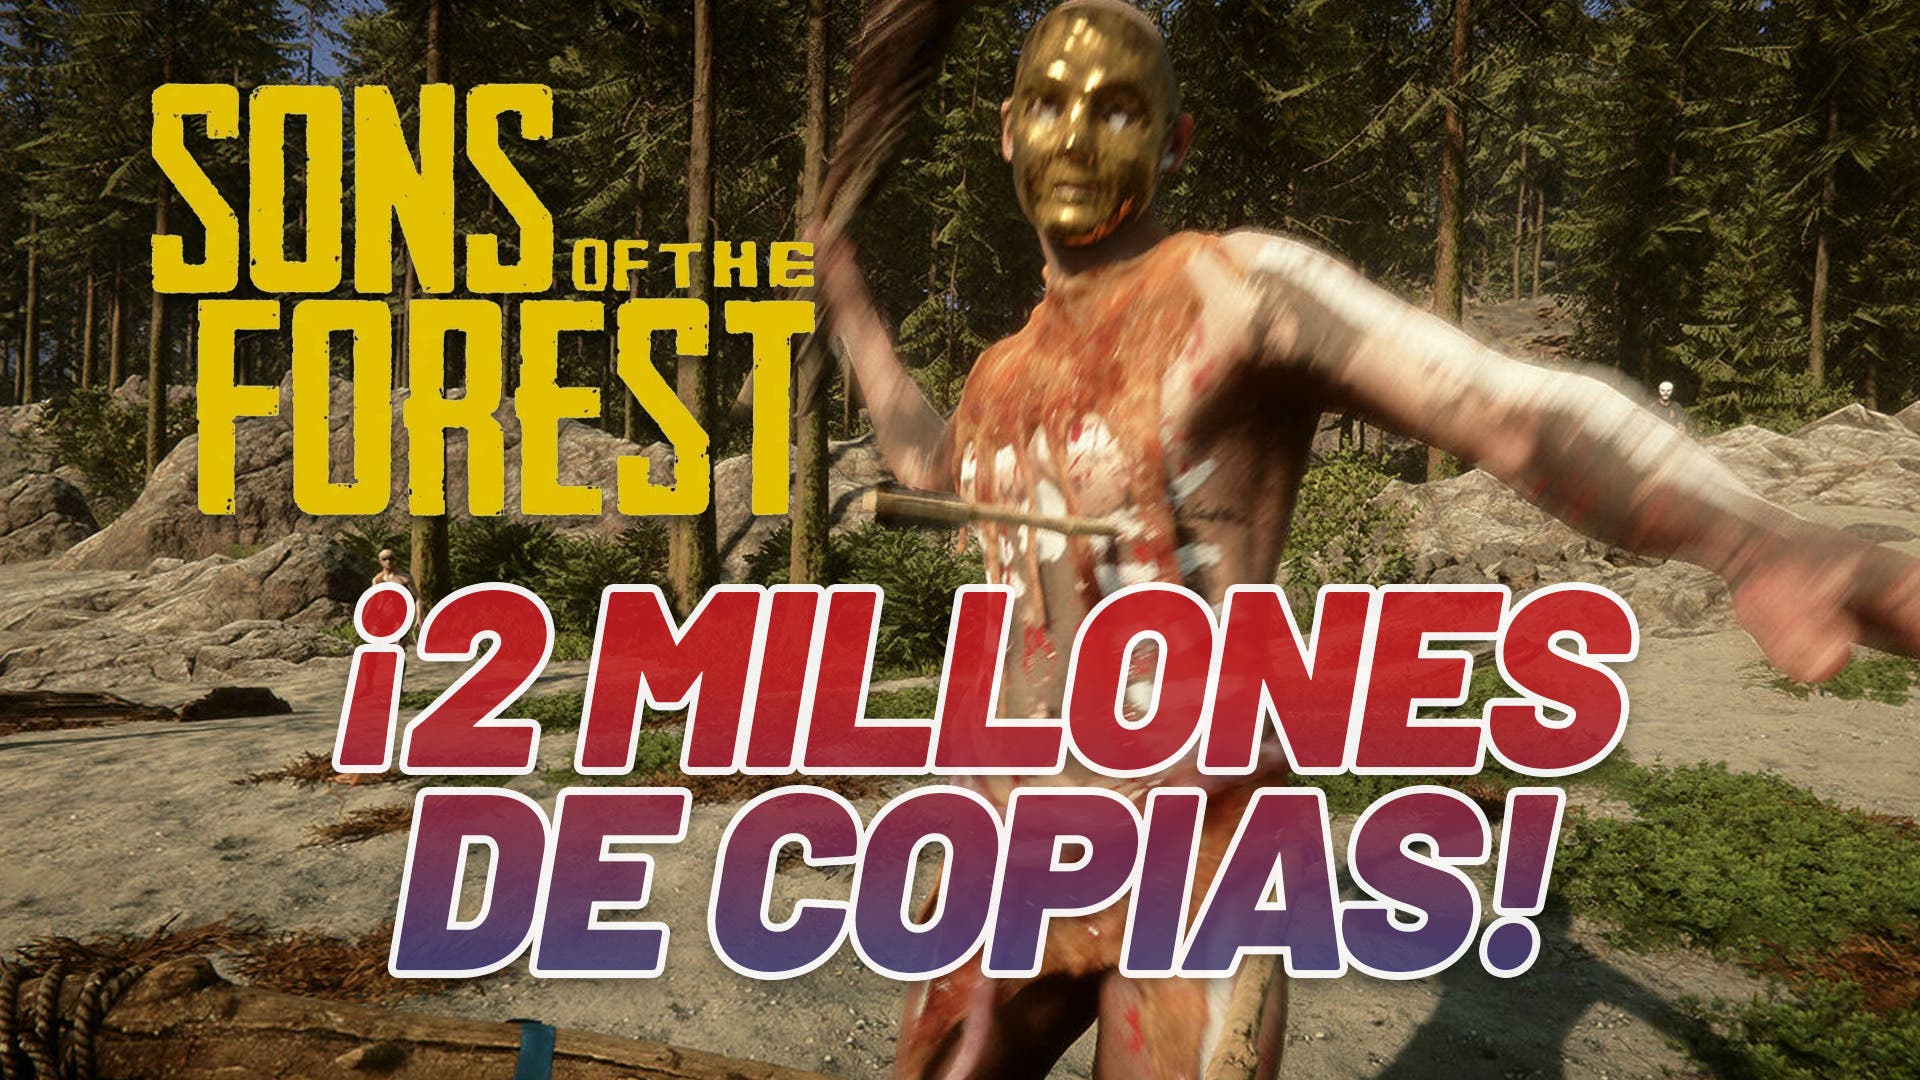 Sons of the Forest triumphs on Steam and manages to sell 2 million copies in 24 hours